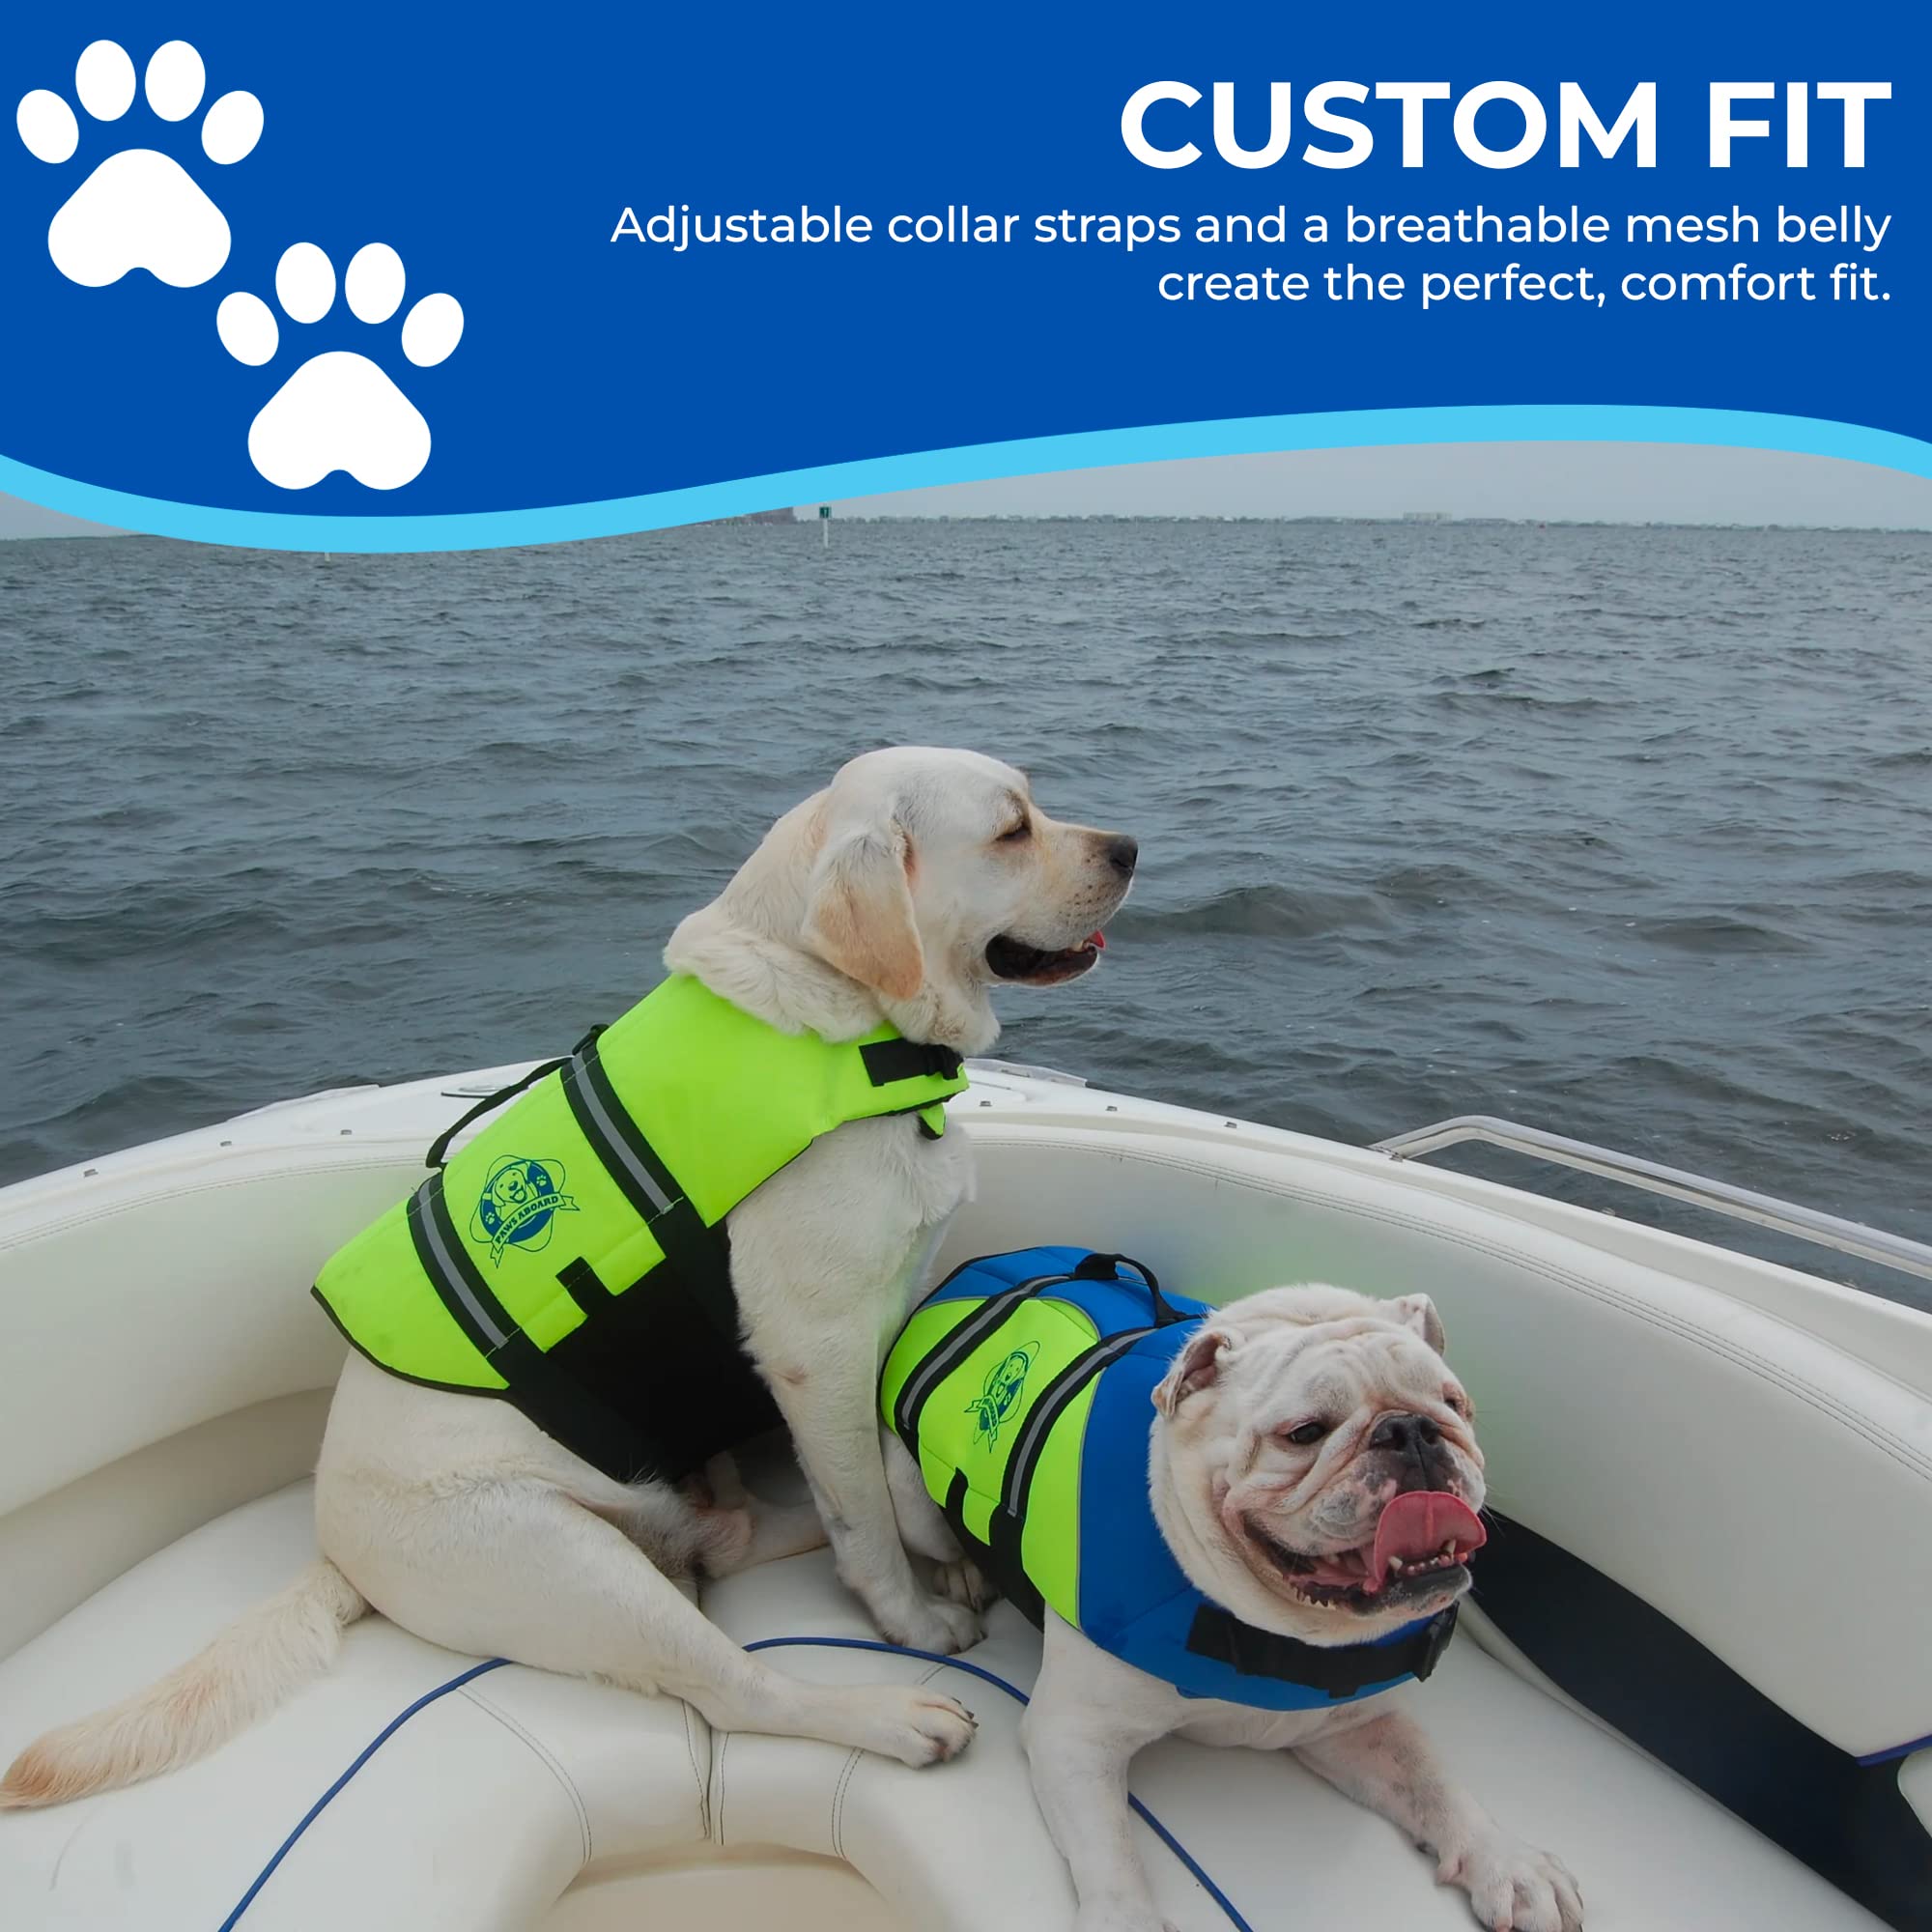 Paws Aboard Dog Life Jacket - Keep Your Canine Safe with a Neoprene Life Vest - Designer Life Jackets - Perfect for Swimming and Boating - Red, Medium